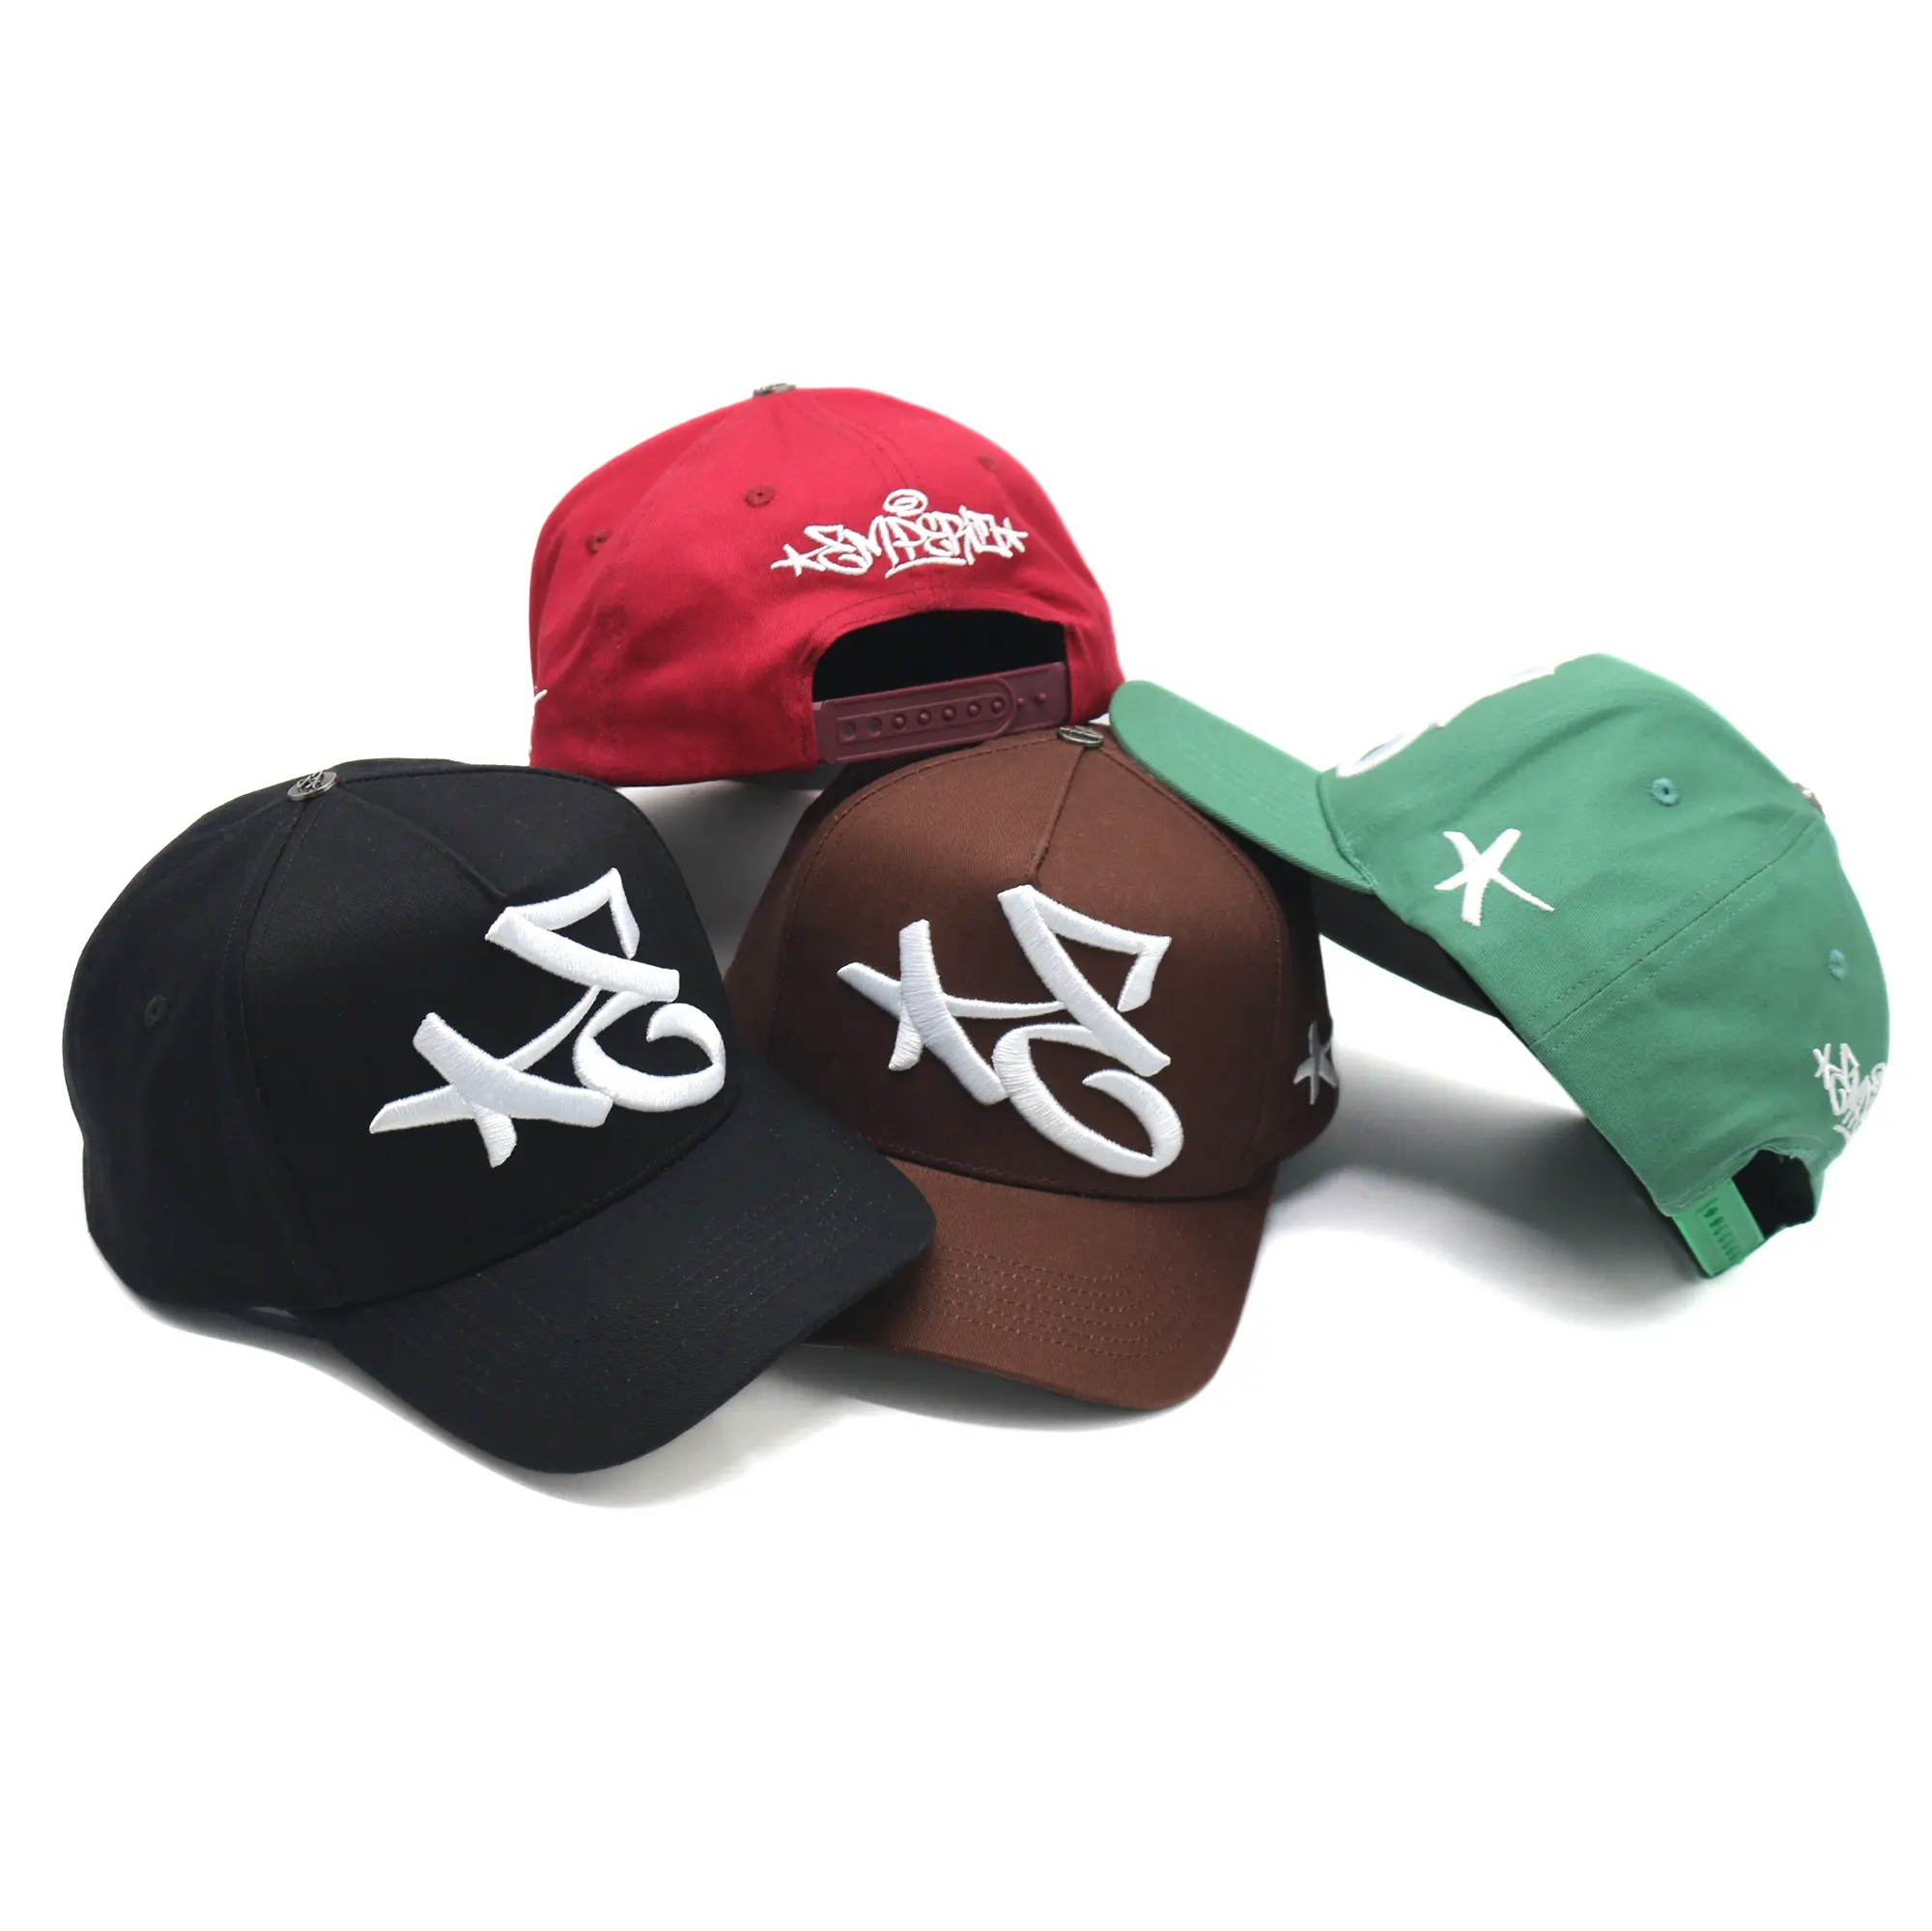 Hot design cotton curved brim baseball hat with custom top button factory price